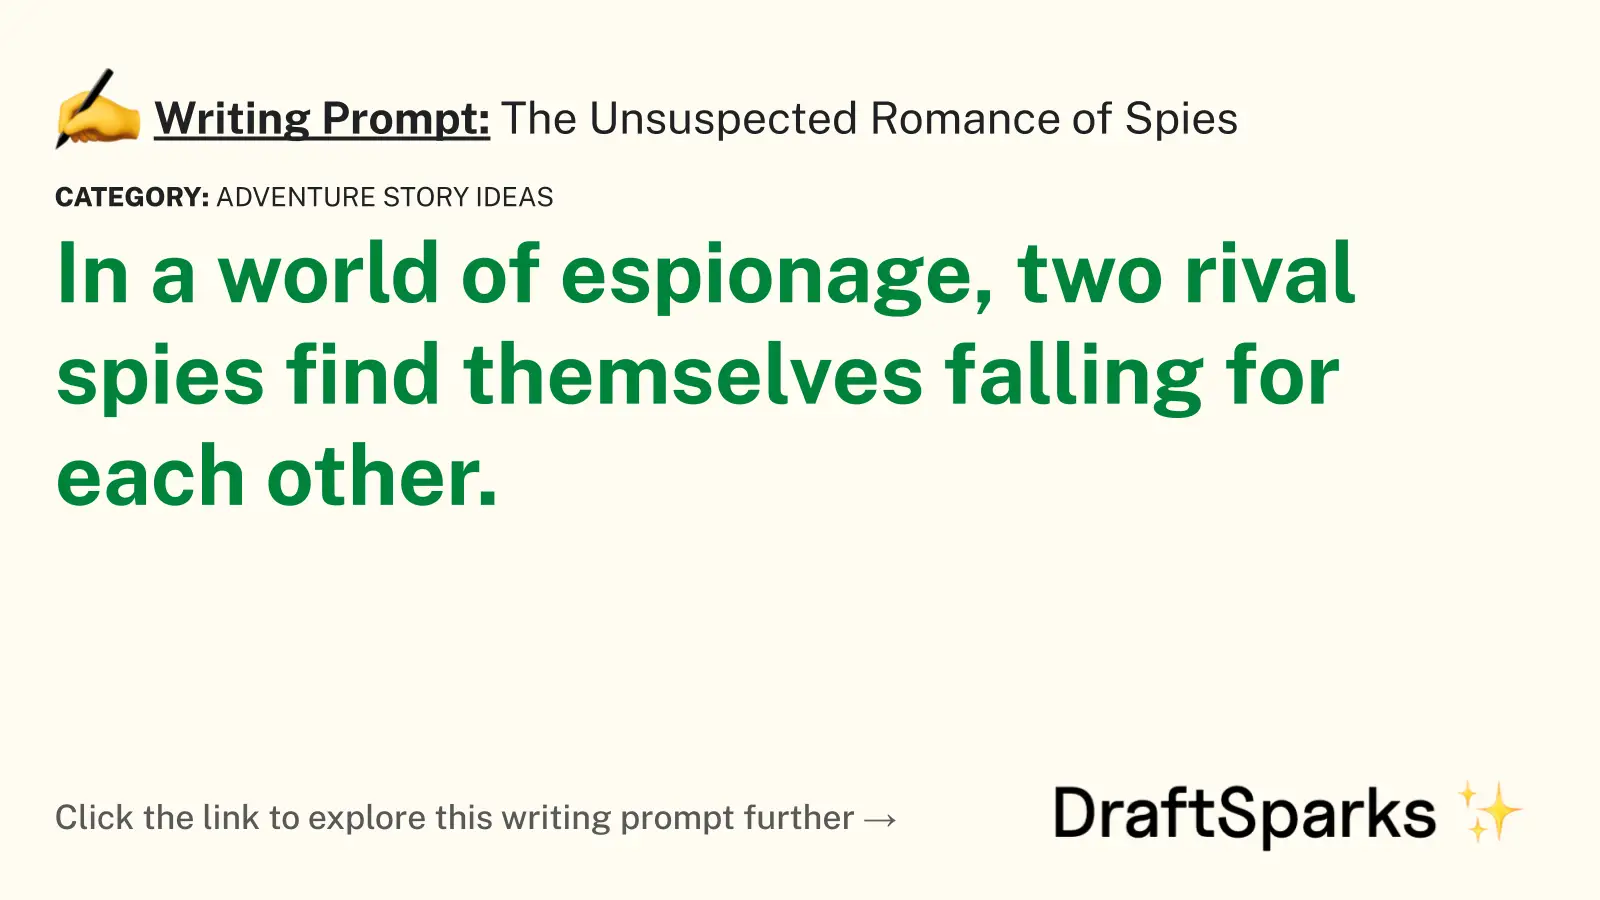 The Unsuspected Romance of Spies